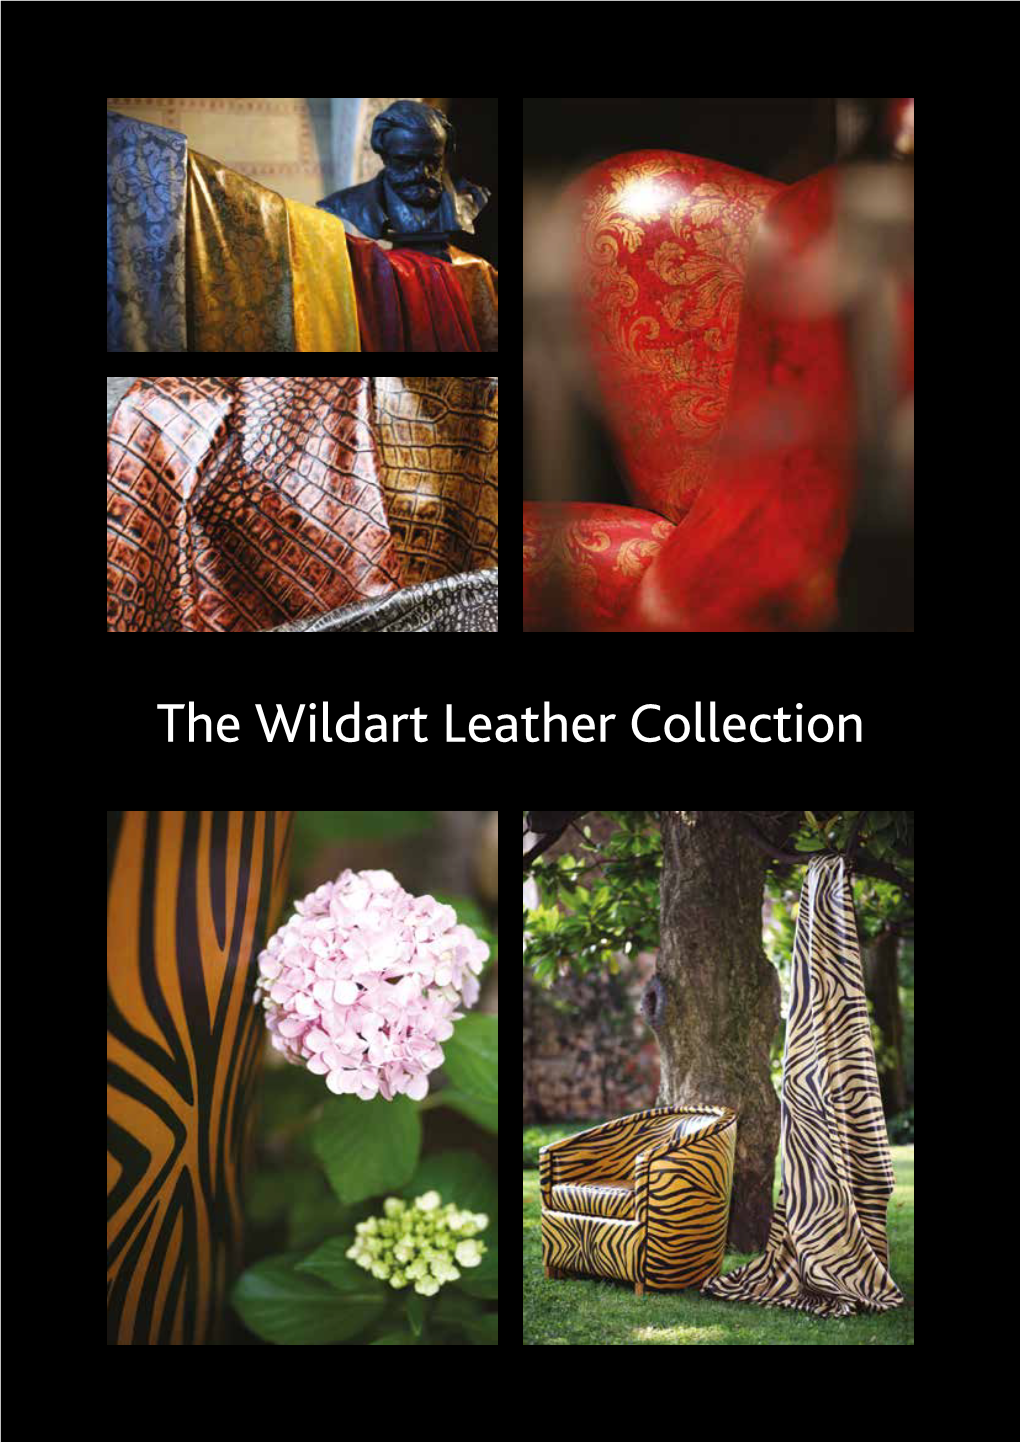 The Wildart Leather Collection Metallic Zebra Go Wild and Sparkle with These Zebra Patterned, Super Soft Metallic Hides